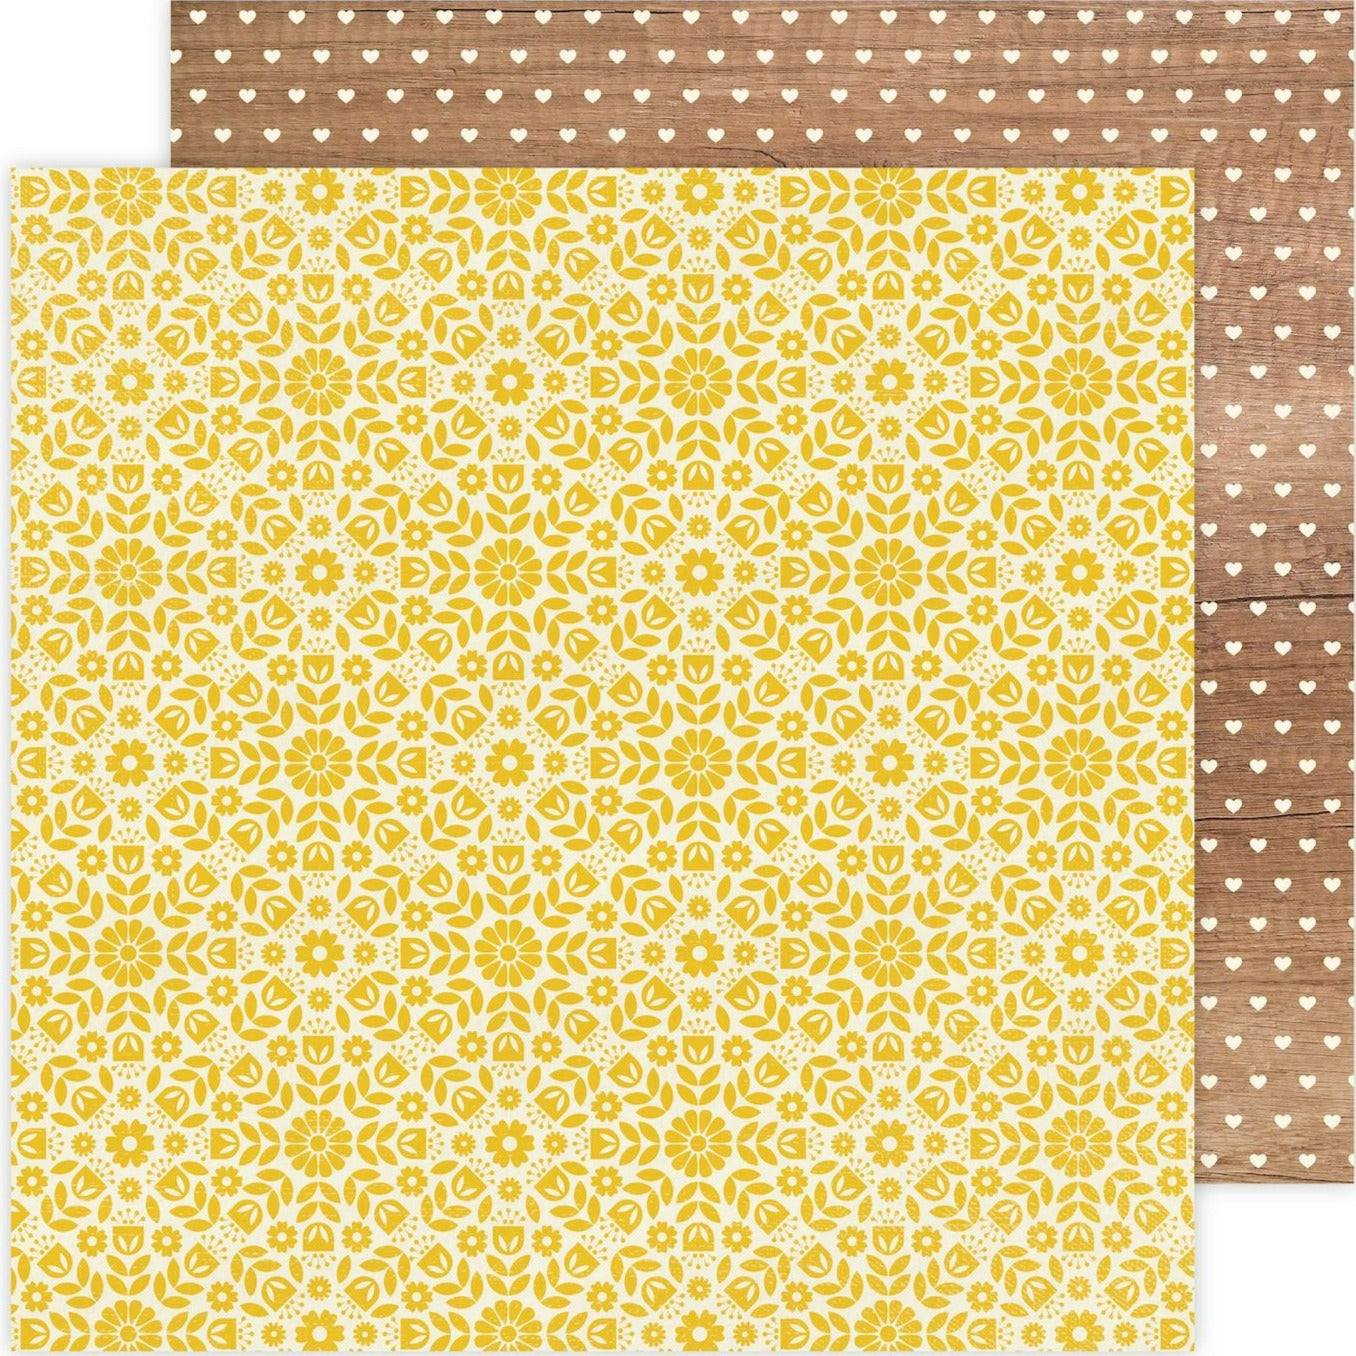 12x12 patterned paper, (Side A - yellow retro wallpaper pattern on an off-white background, Side B - tiny white hearts on a woodgrain background) - from American Crafts